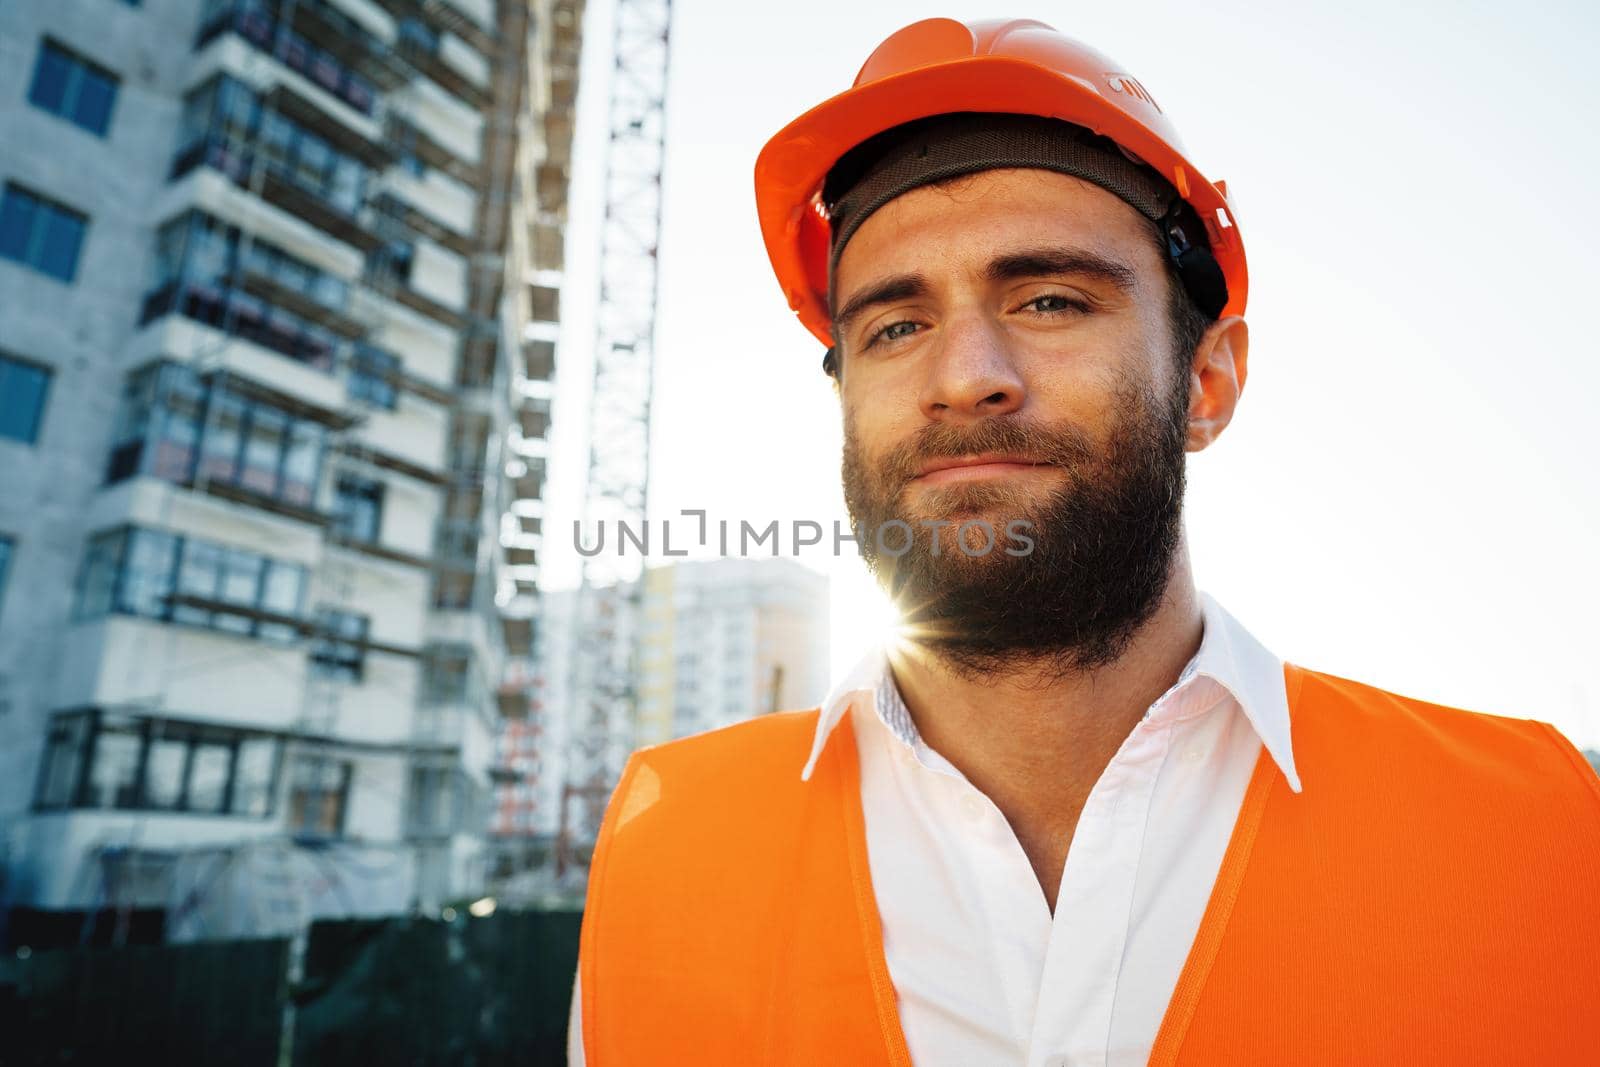 Builder wearing hardhat and safety vest standing on a commercial construction site by Fabrikasimf